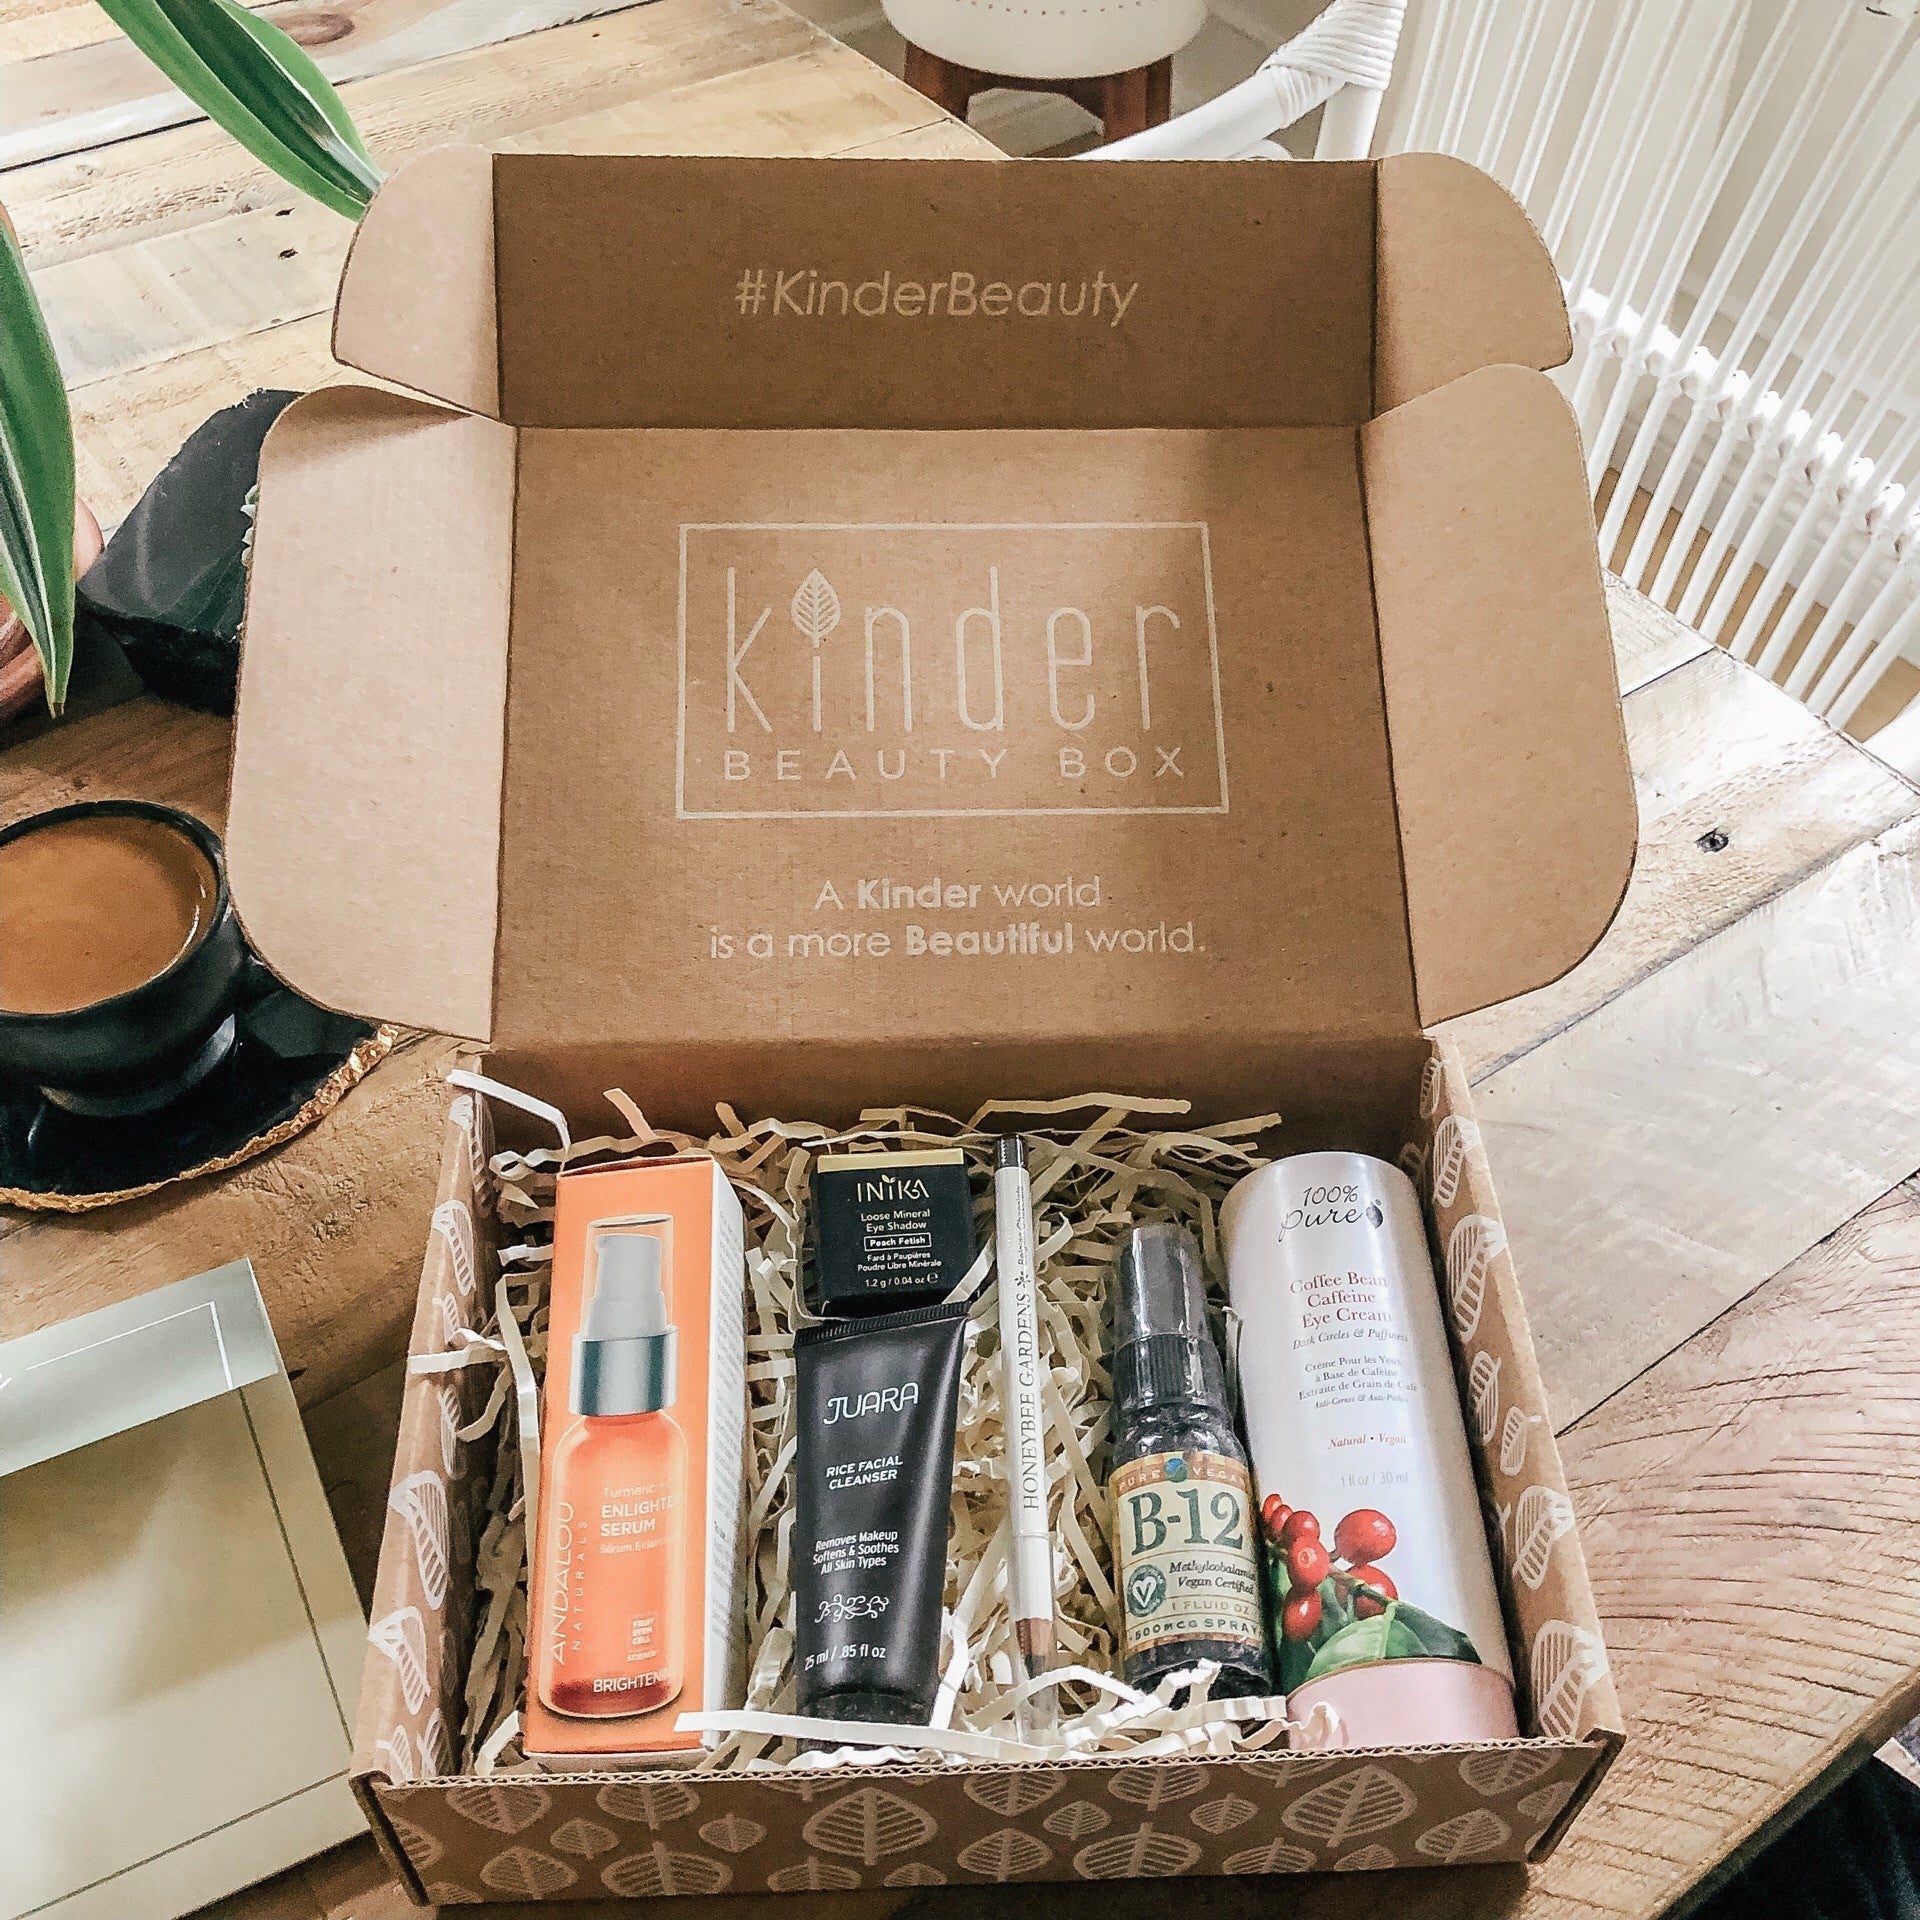 Kinder Beauty Box Reviews: Everything You Need To Know